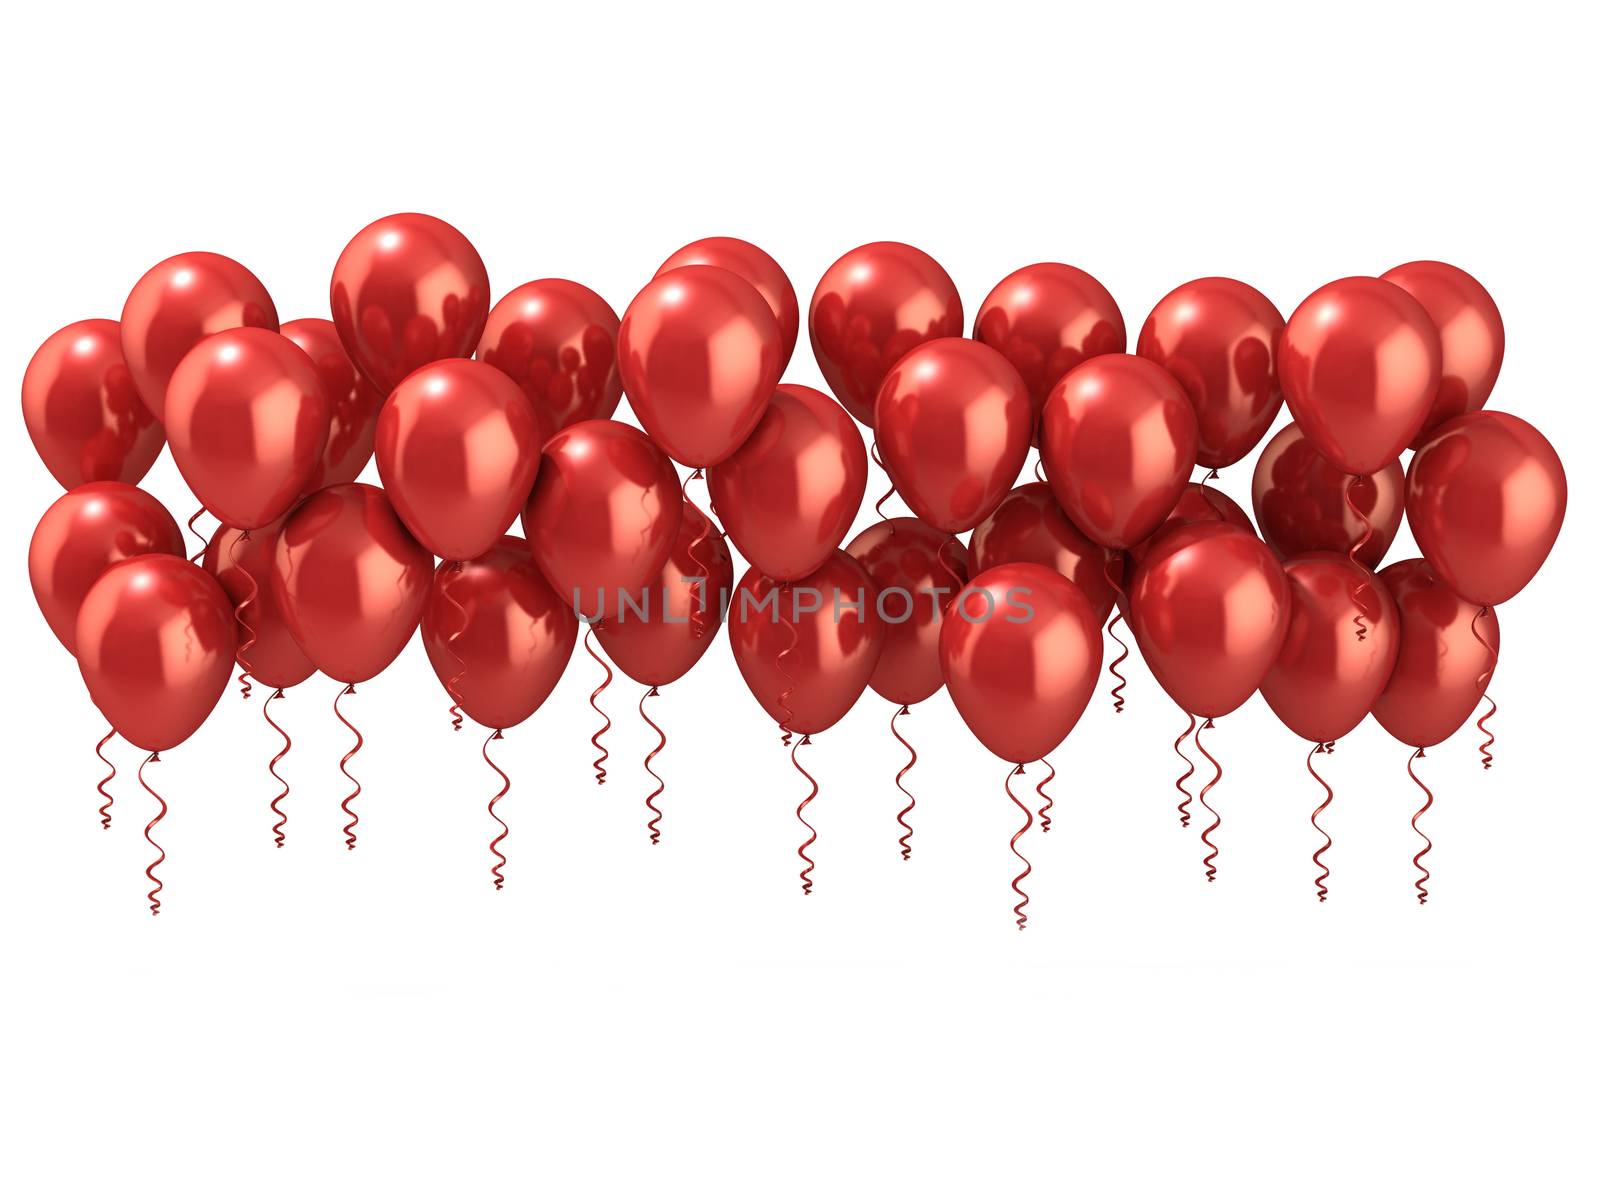 Red party balloons row, isolated on white background